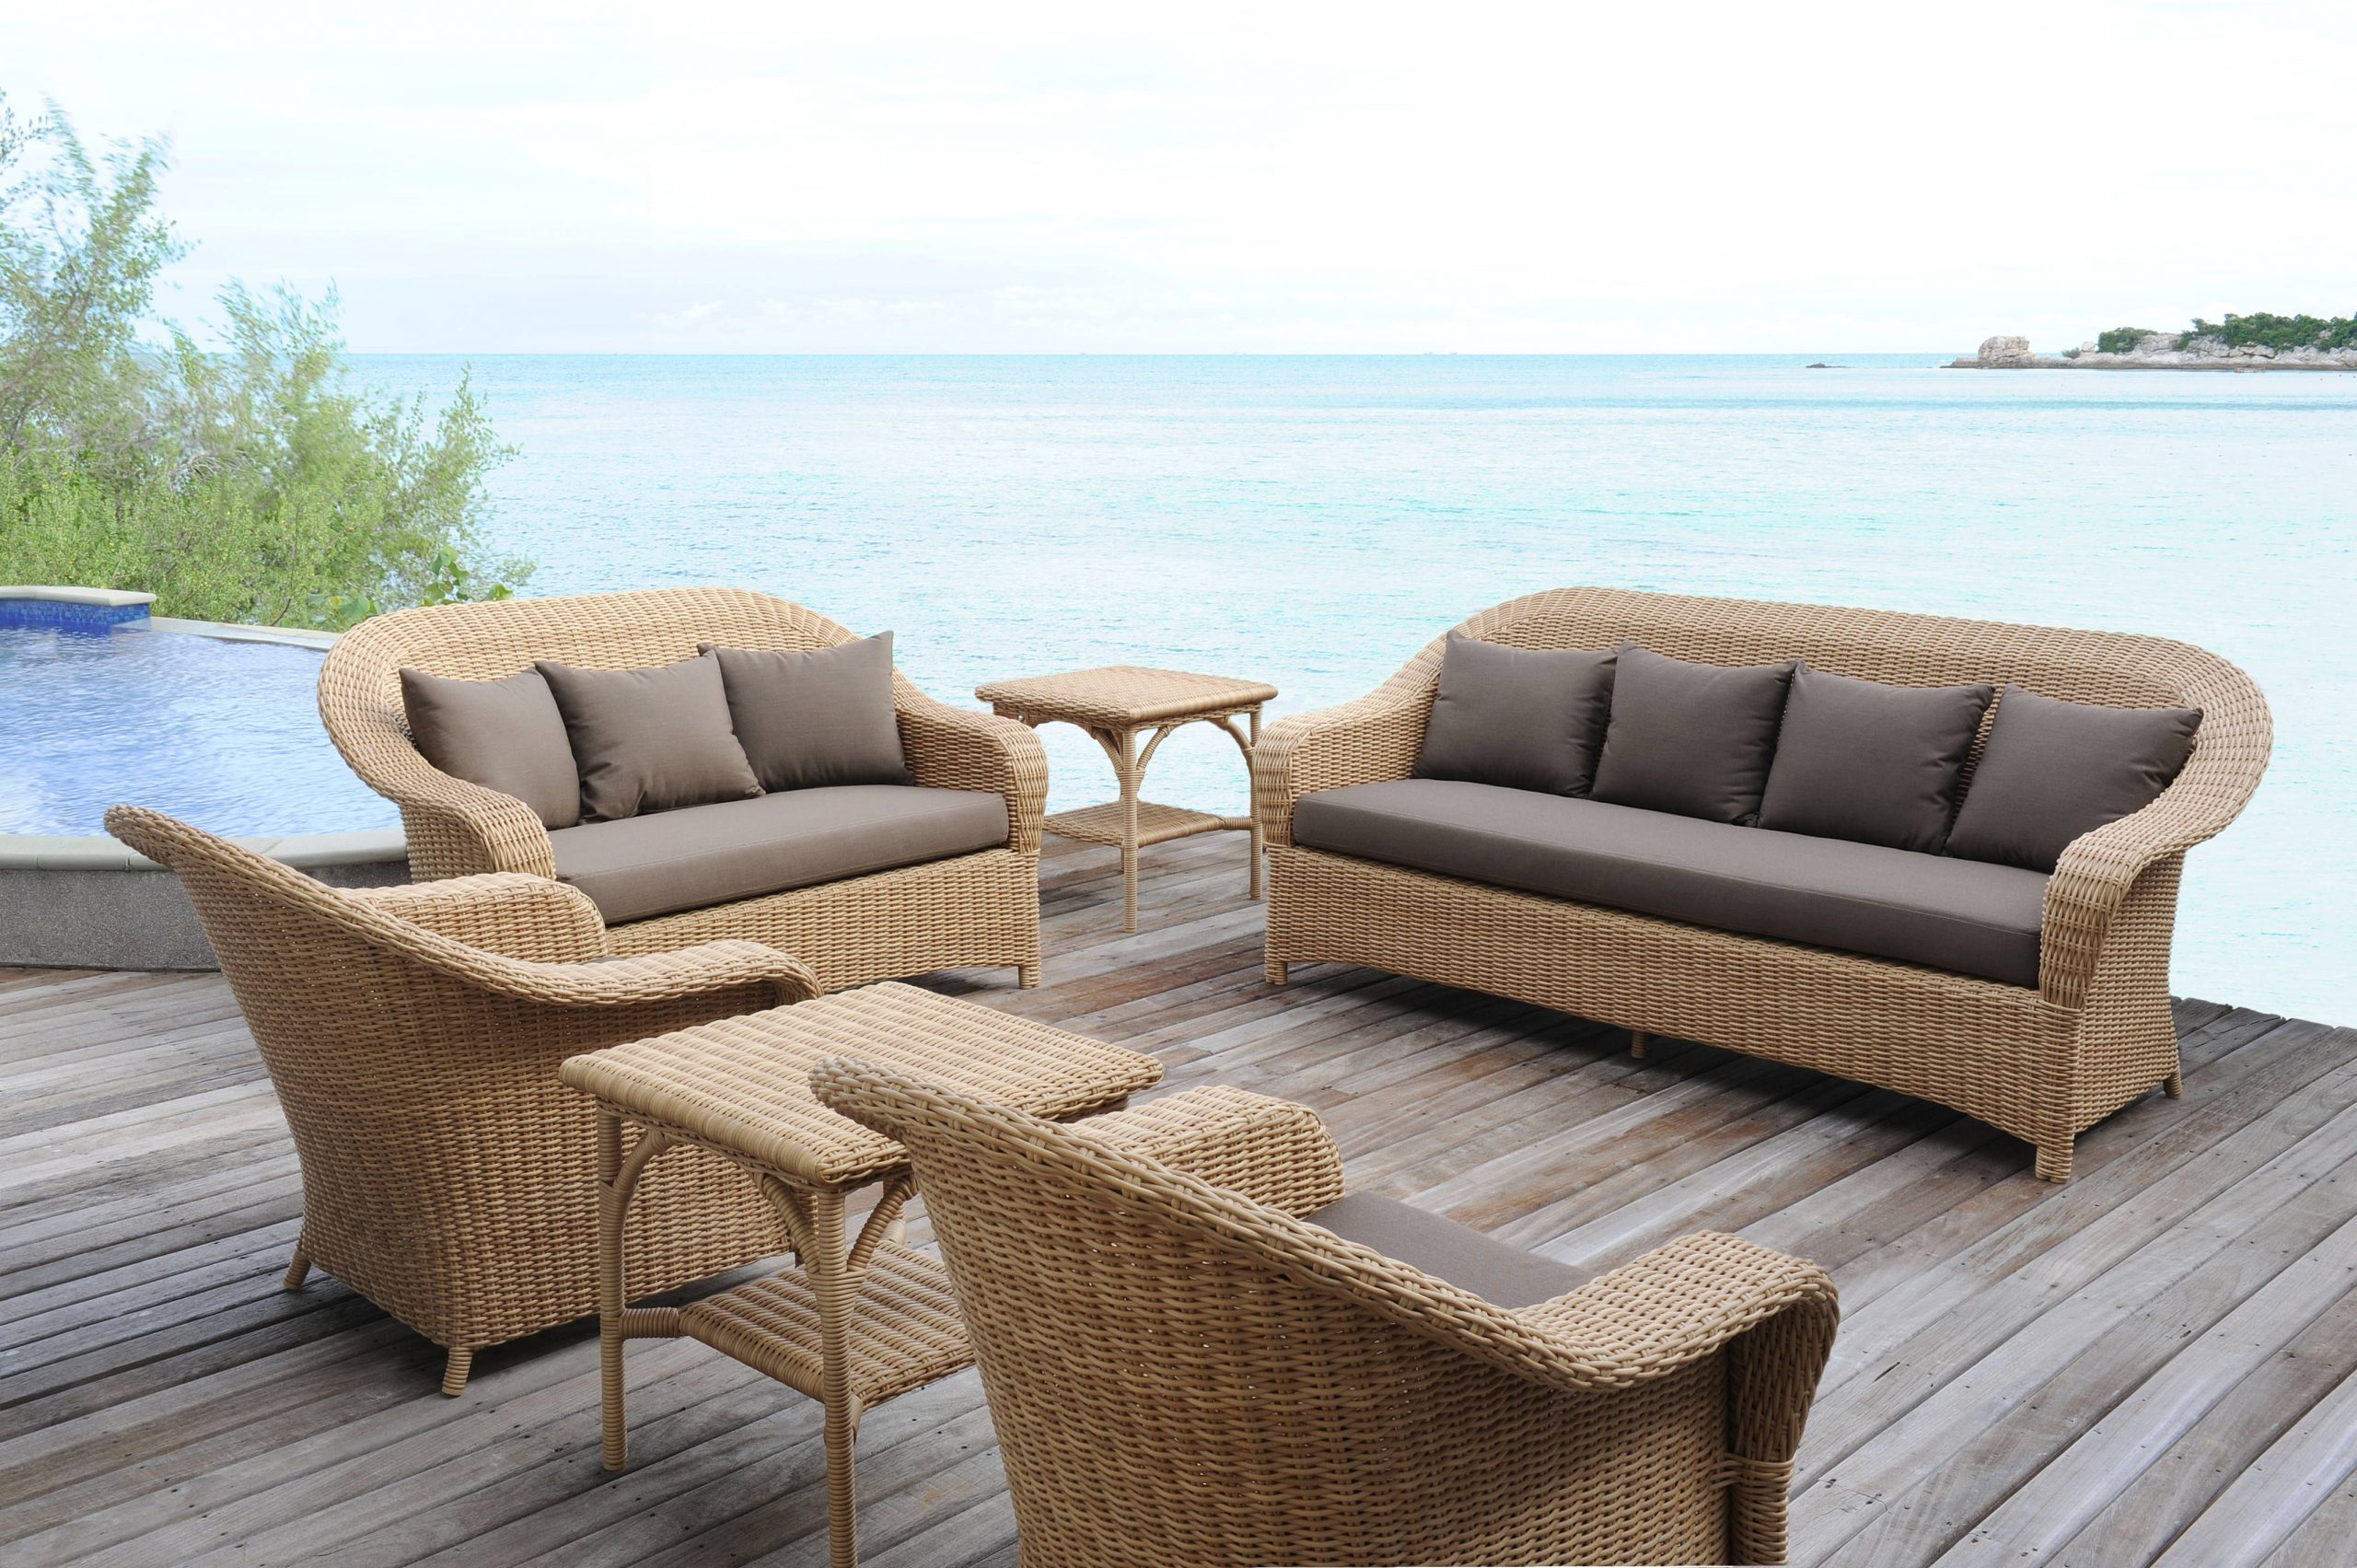 The Pieces In The Java Collection Use Rattan-Like Fibre But ... avec But Salon Jardin